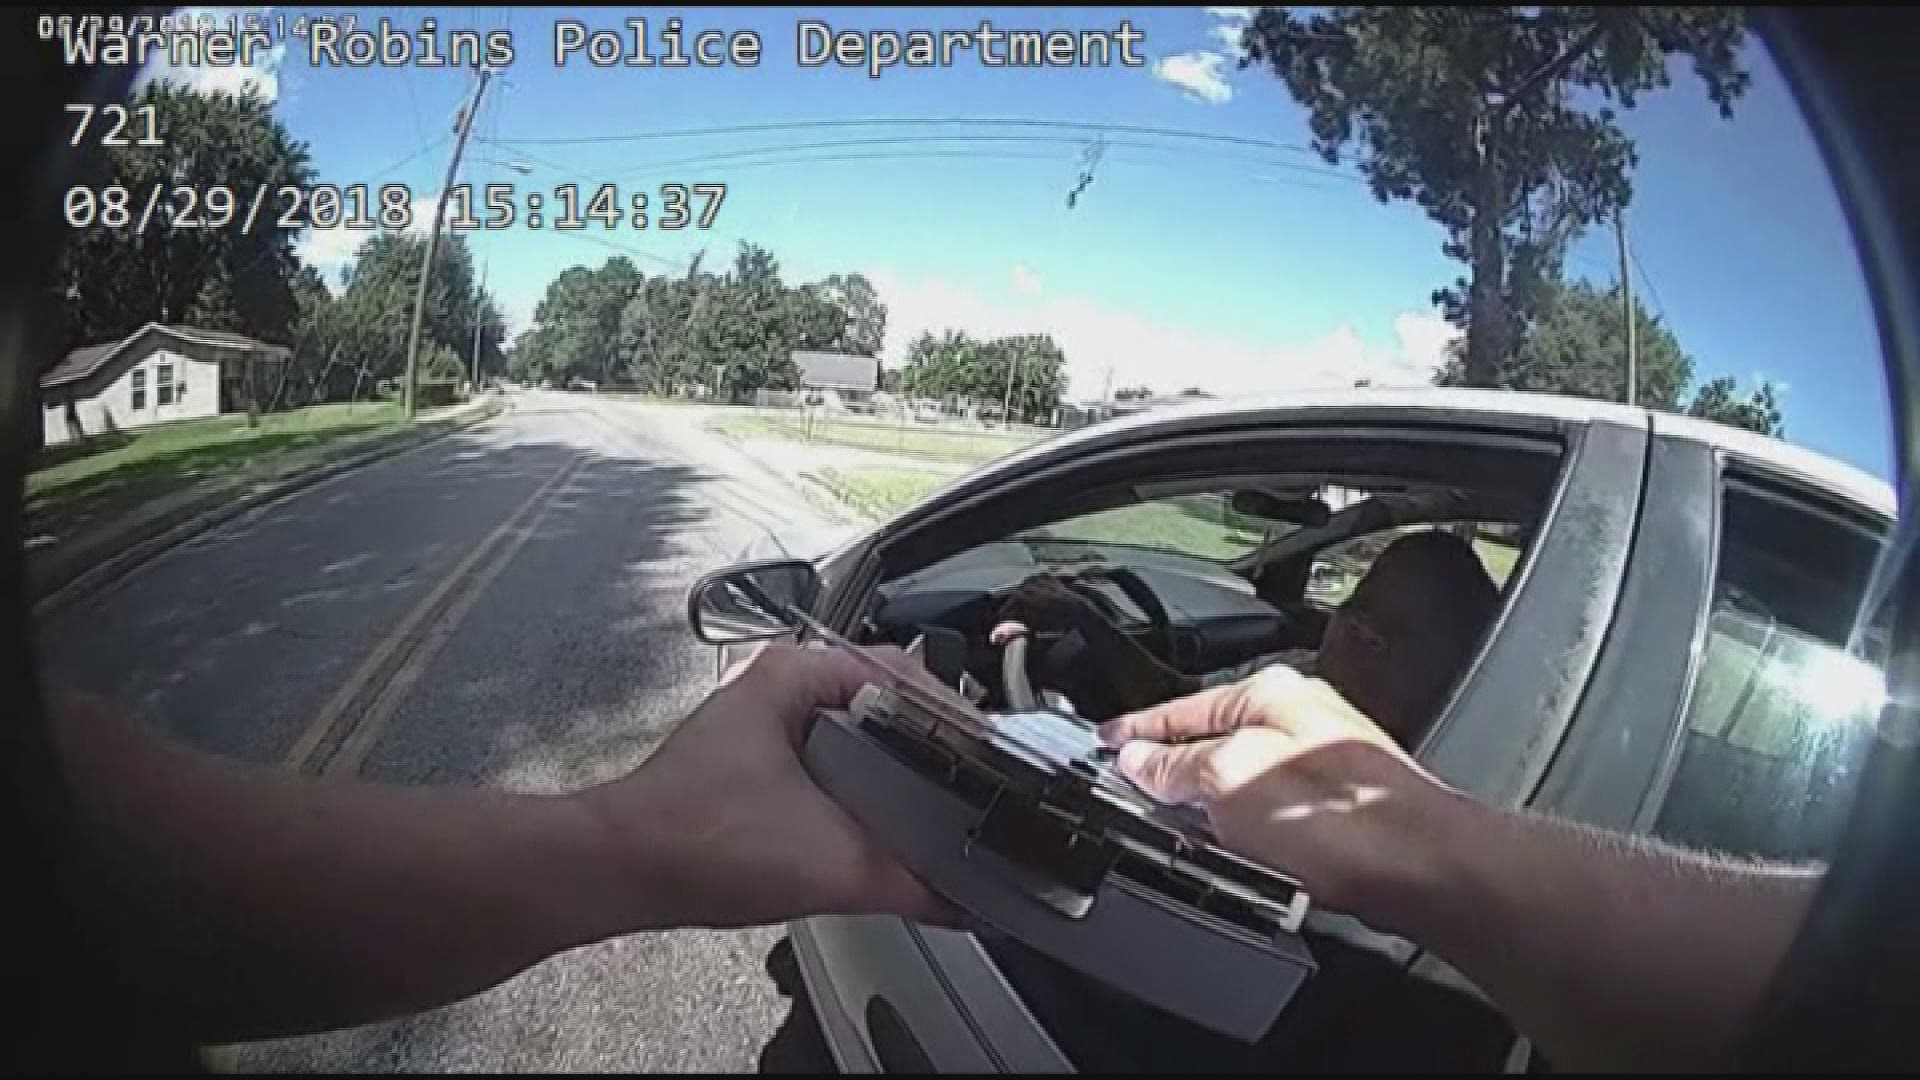 EXTRA: Police body cam footage